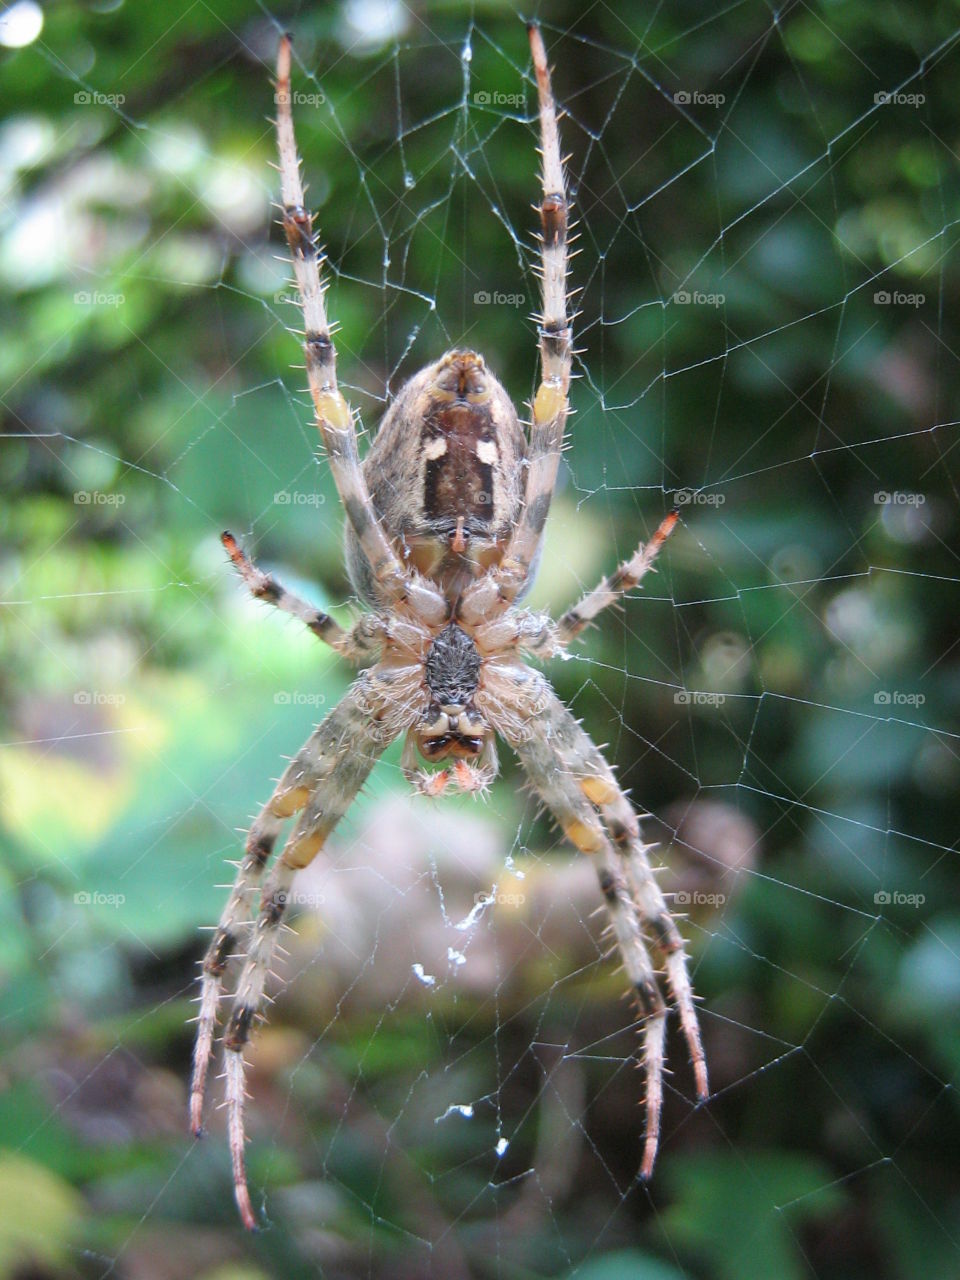 Extreme close-up of spider on spiderweb